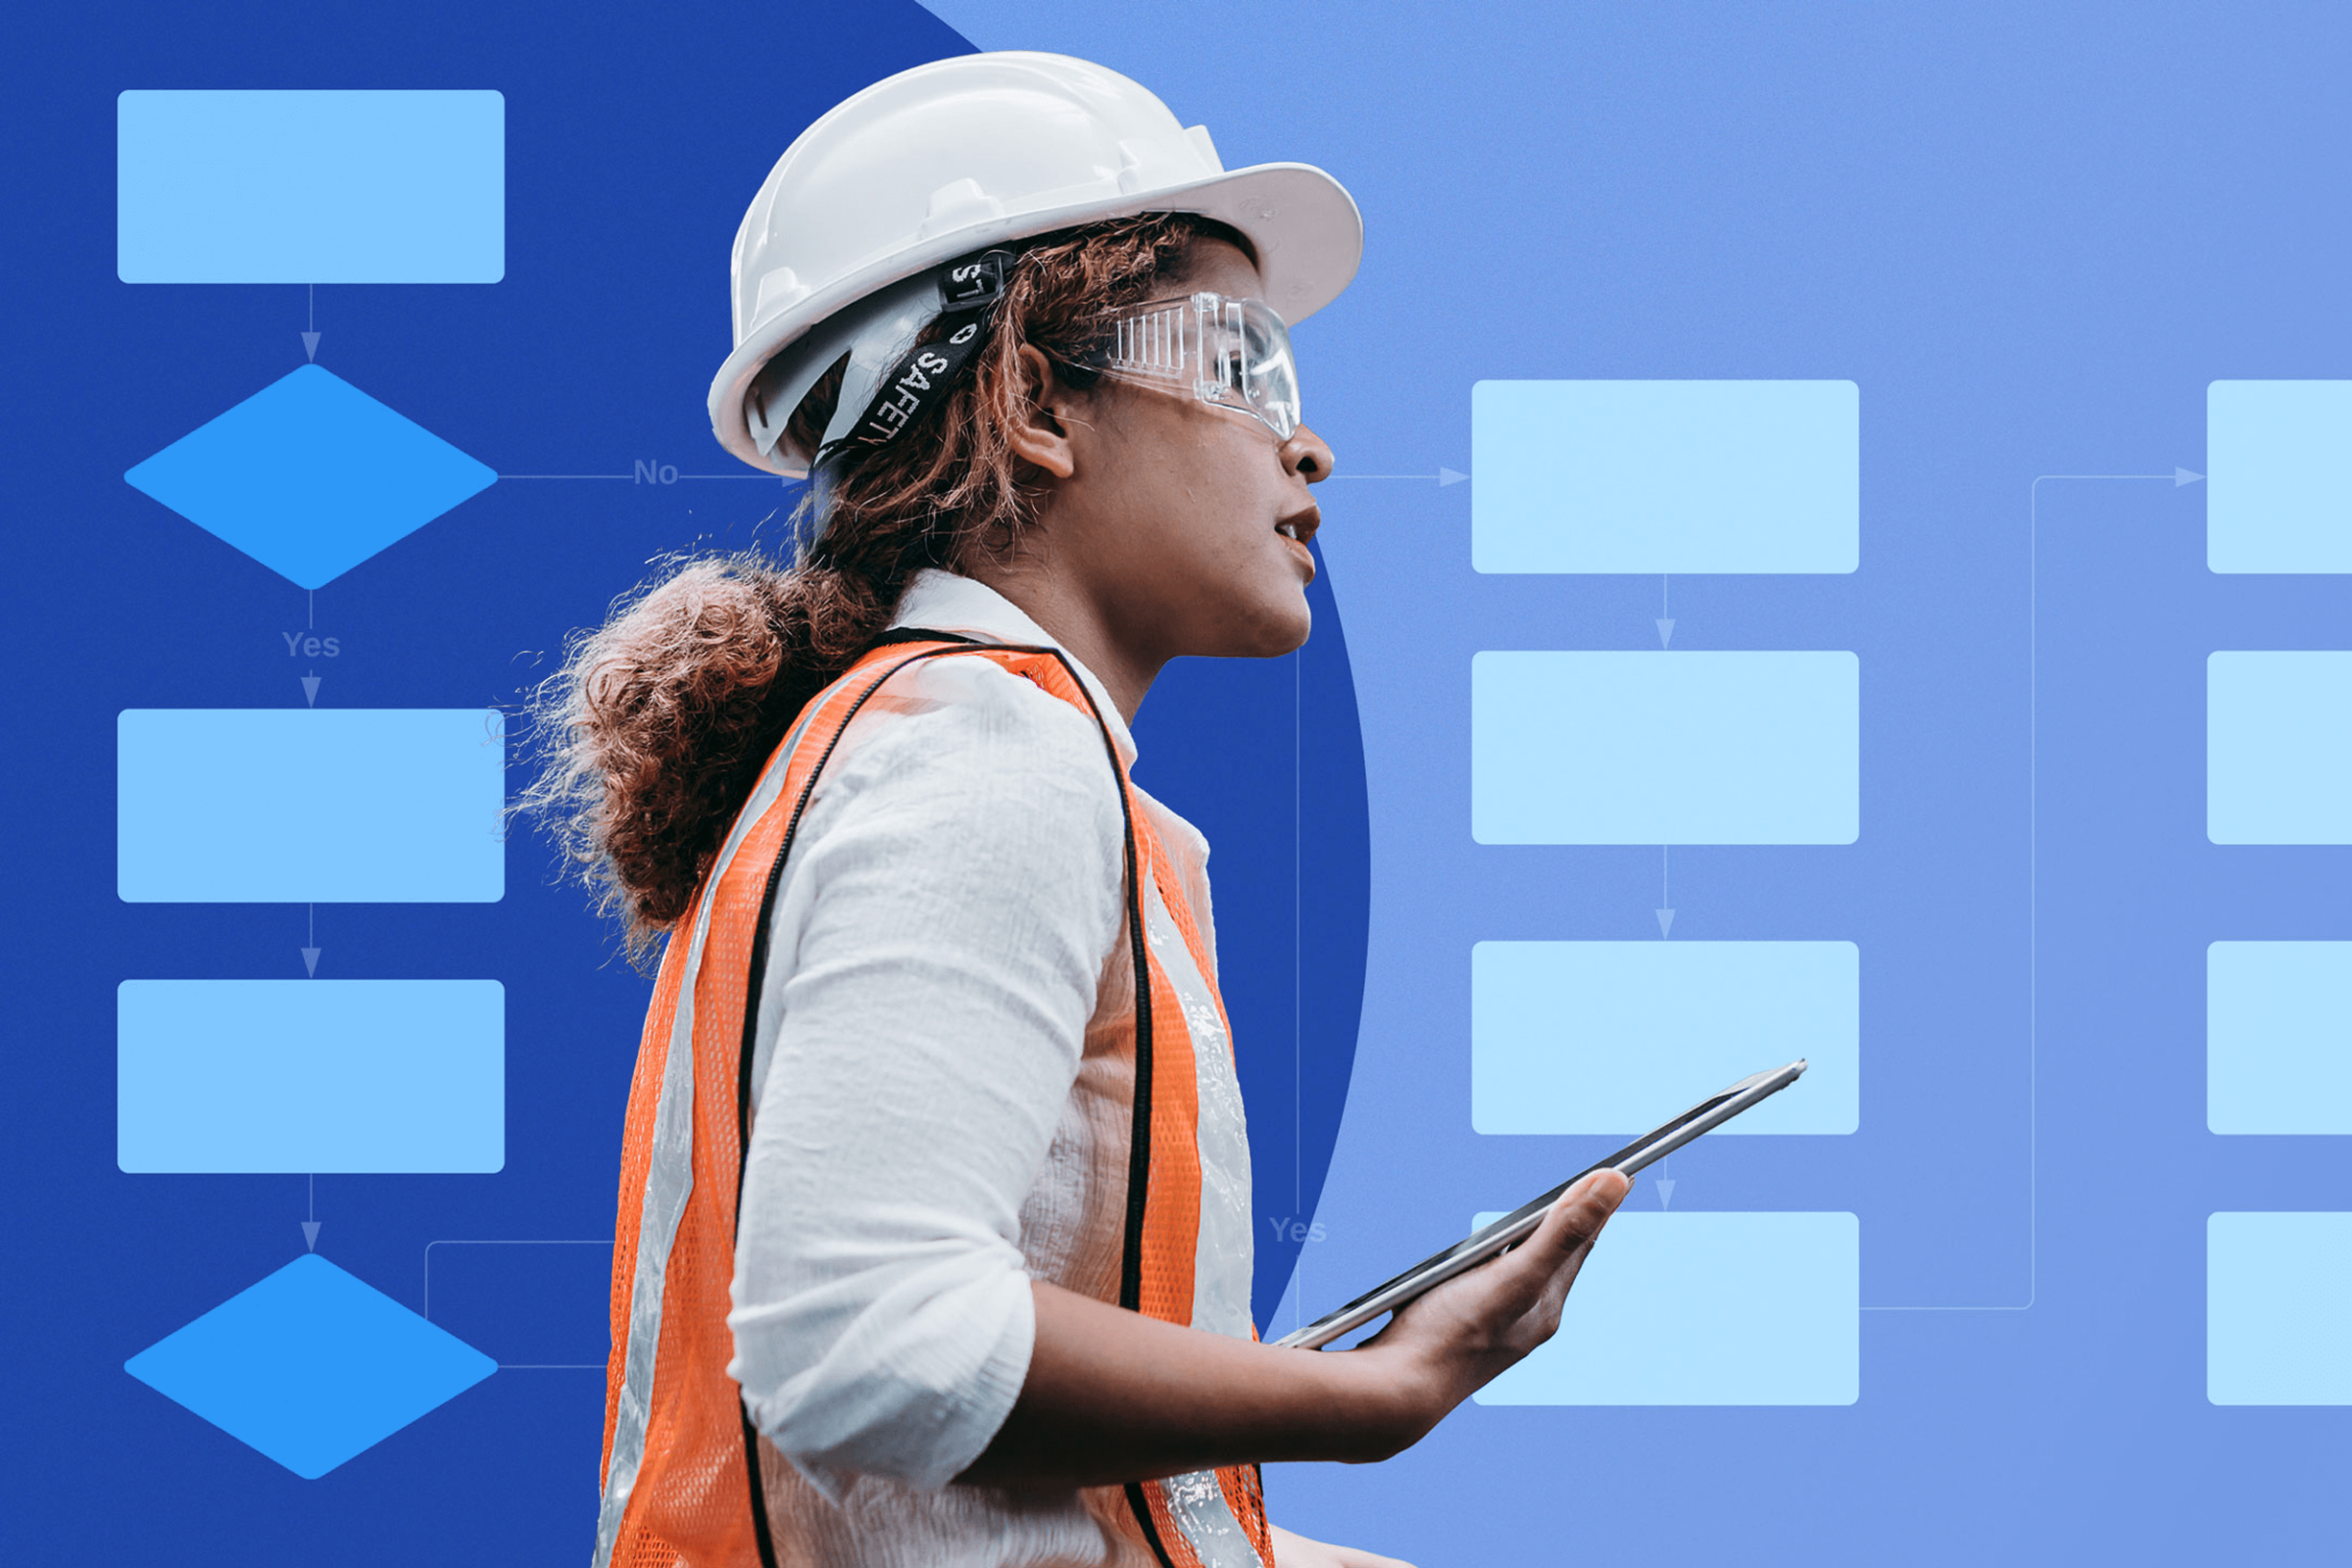 Bespoke image of a woman within the construction industry working on-site. The image has been made by Inc Studio for Compliance Chain